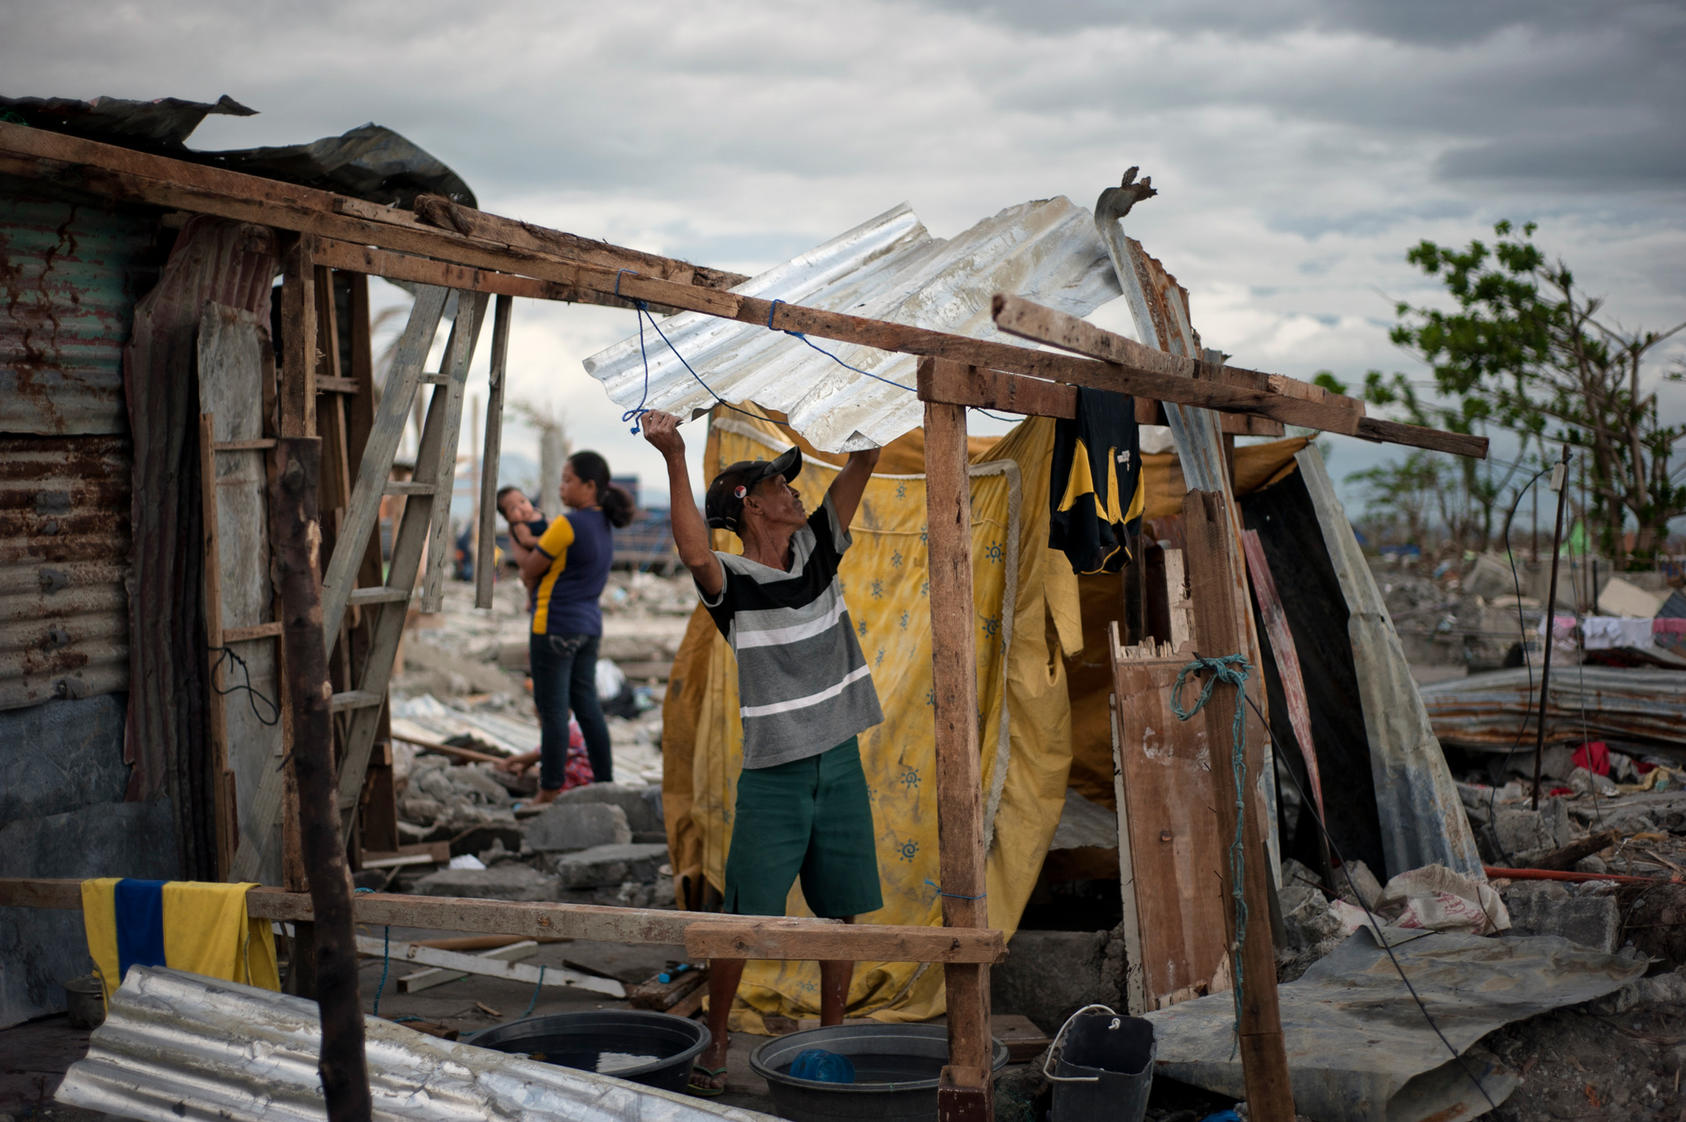 A typhoon victim erects a makeshift house for shelter in Barangay 88, a small coastal village in Tacloban, Philippines, Dec. 7, 2013. Land disputes in settlements and shantytowns up and down the coast are among the many reasons the recovery effort in the area is faltering.